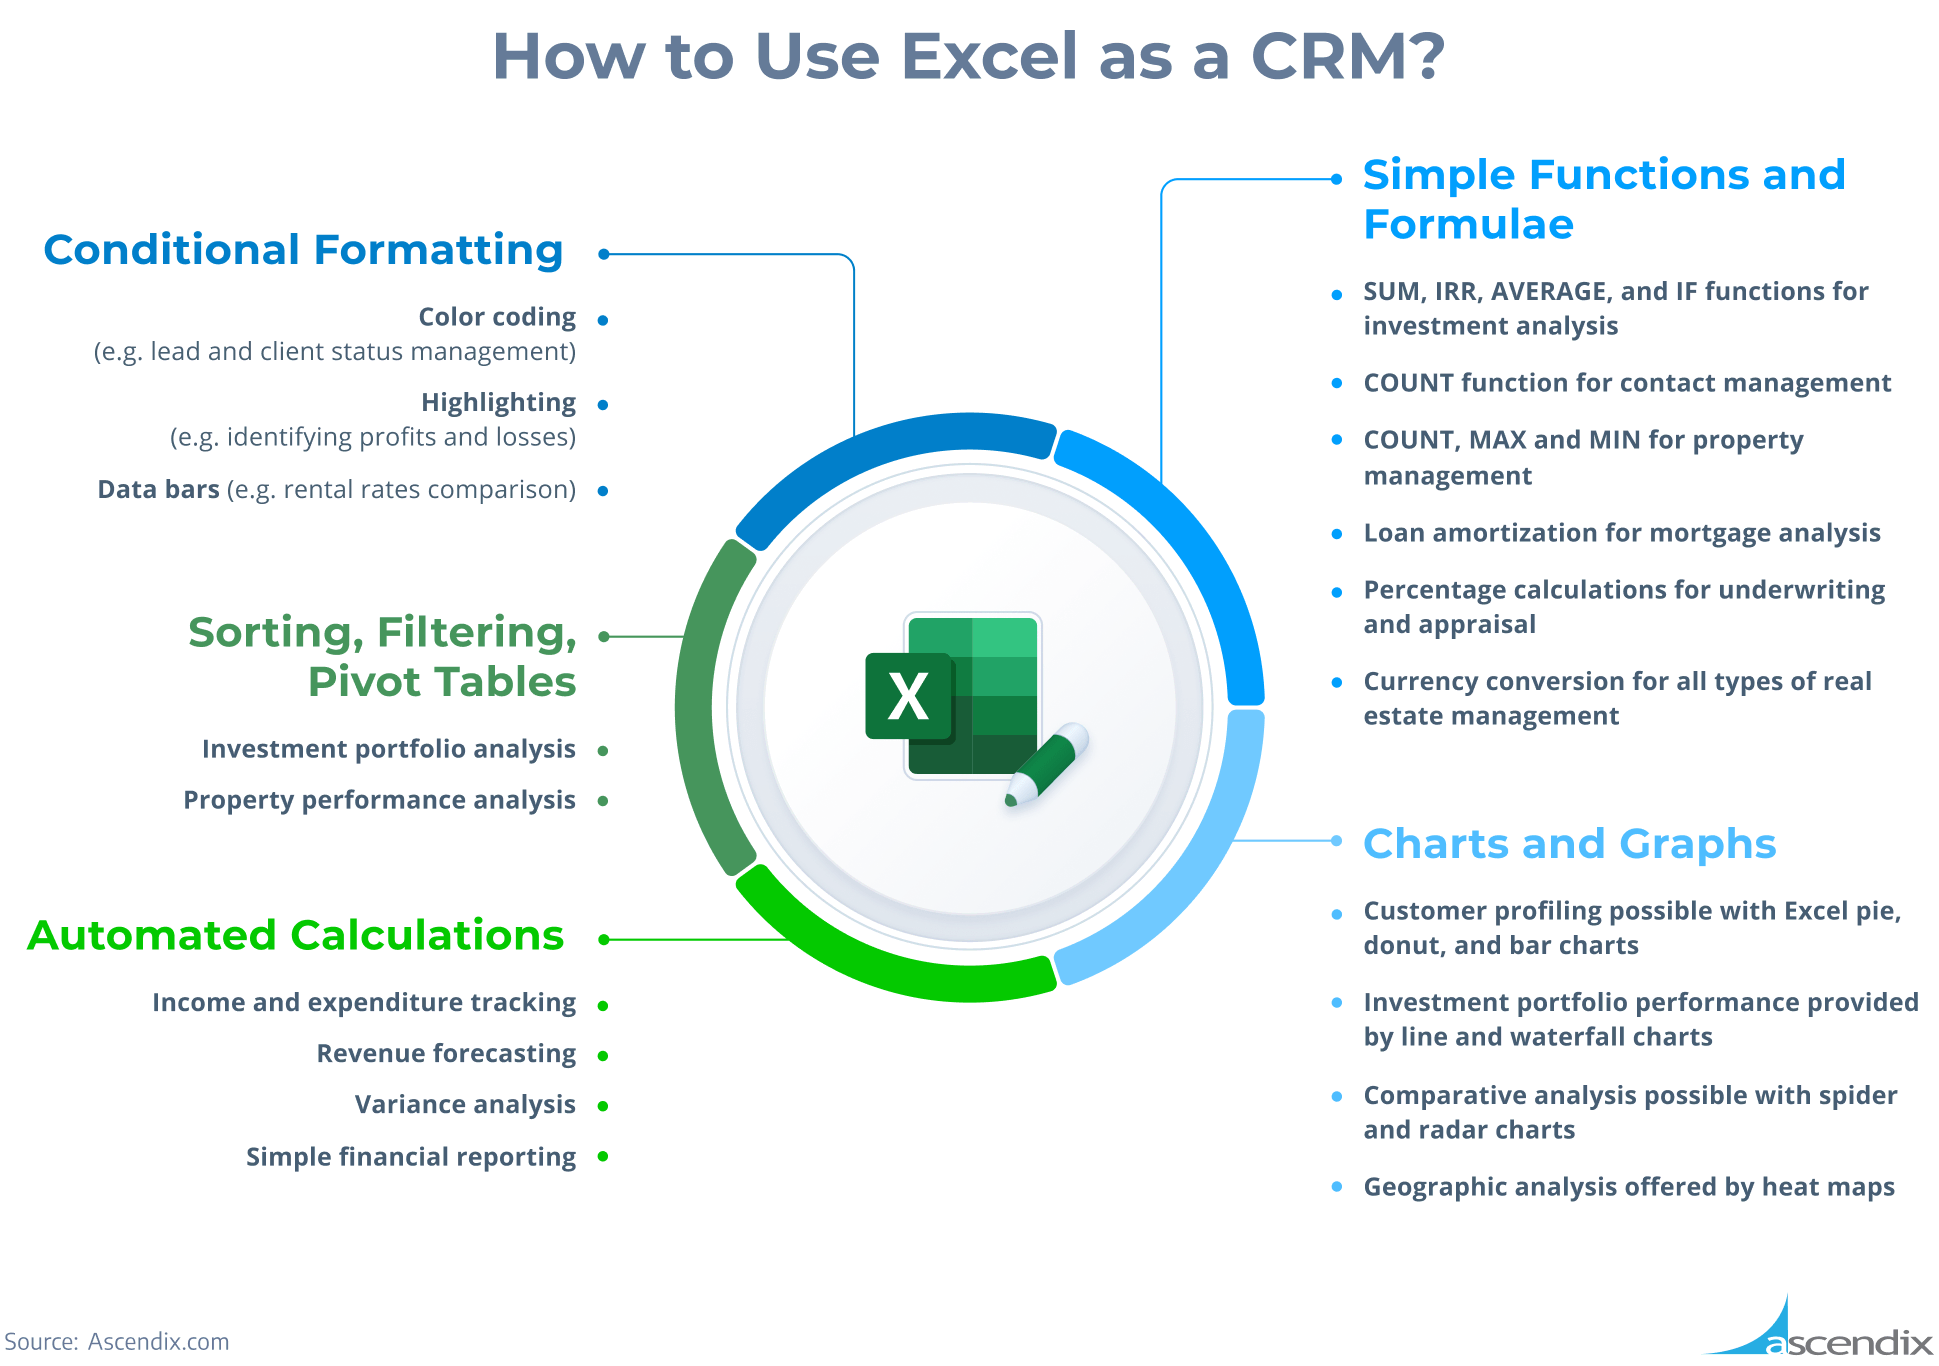 How to Use Excel as a CRM